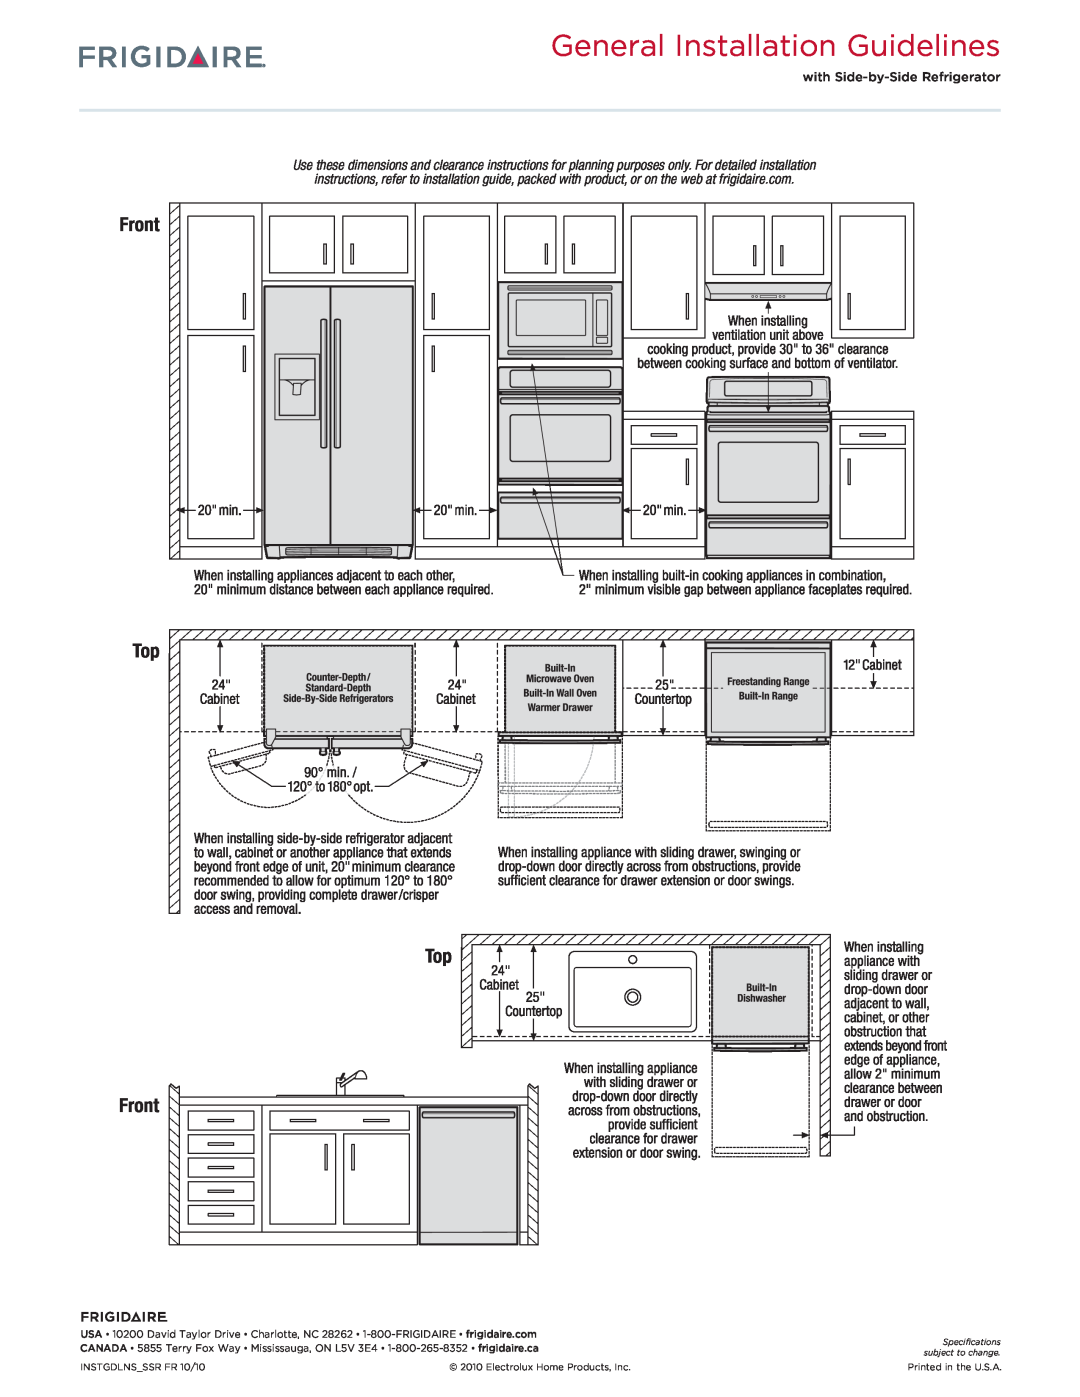 Frigidaire FGB24L2E C dimensions General Installation Guidelines, Top Front 